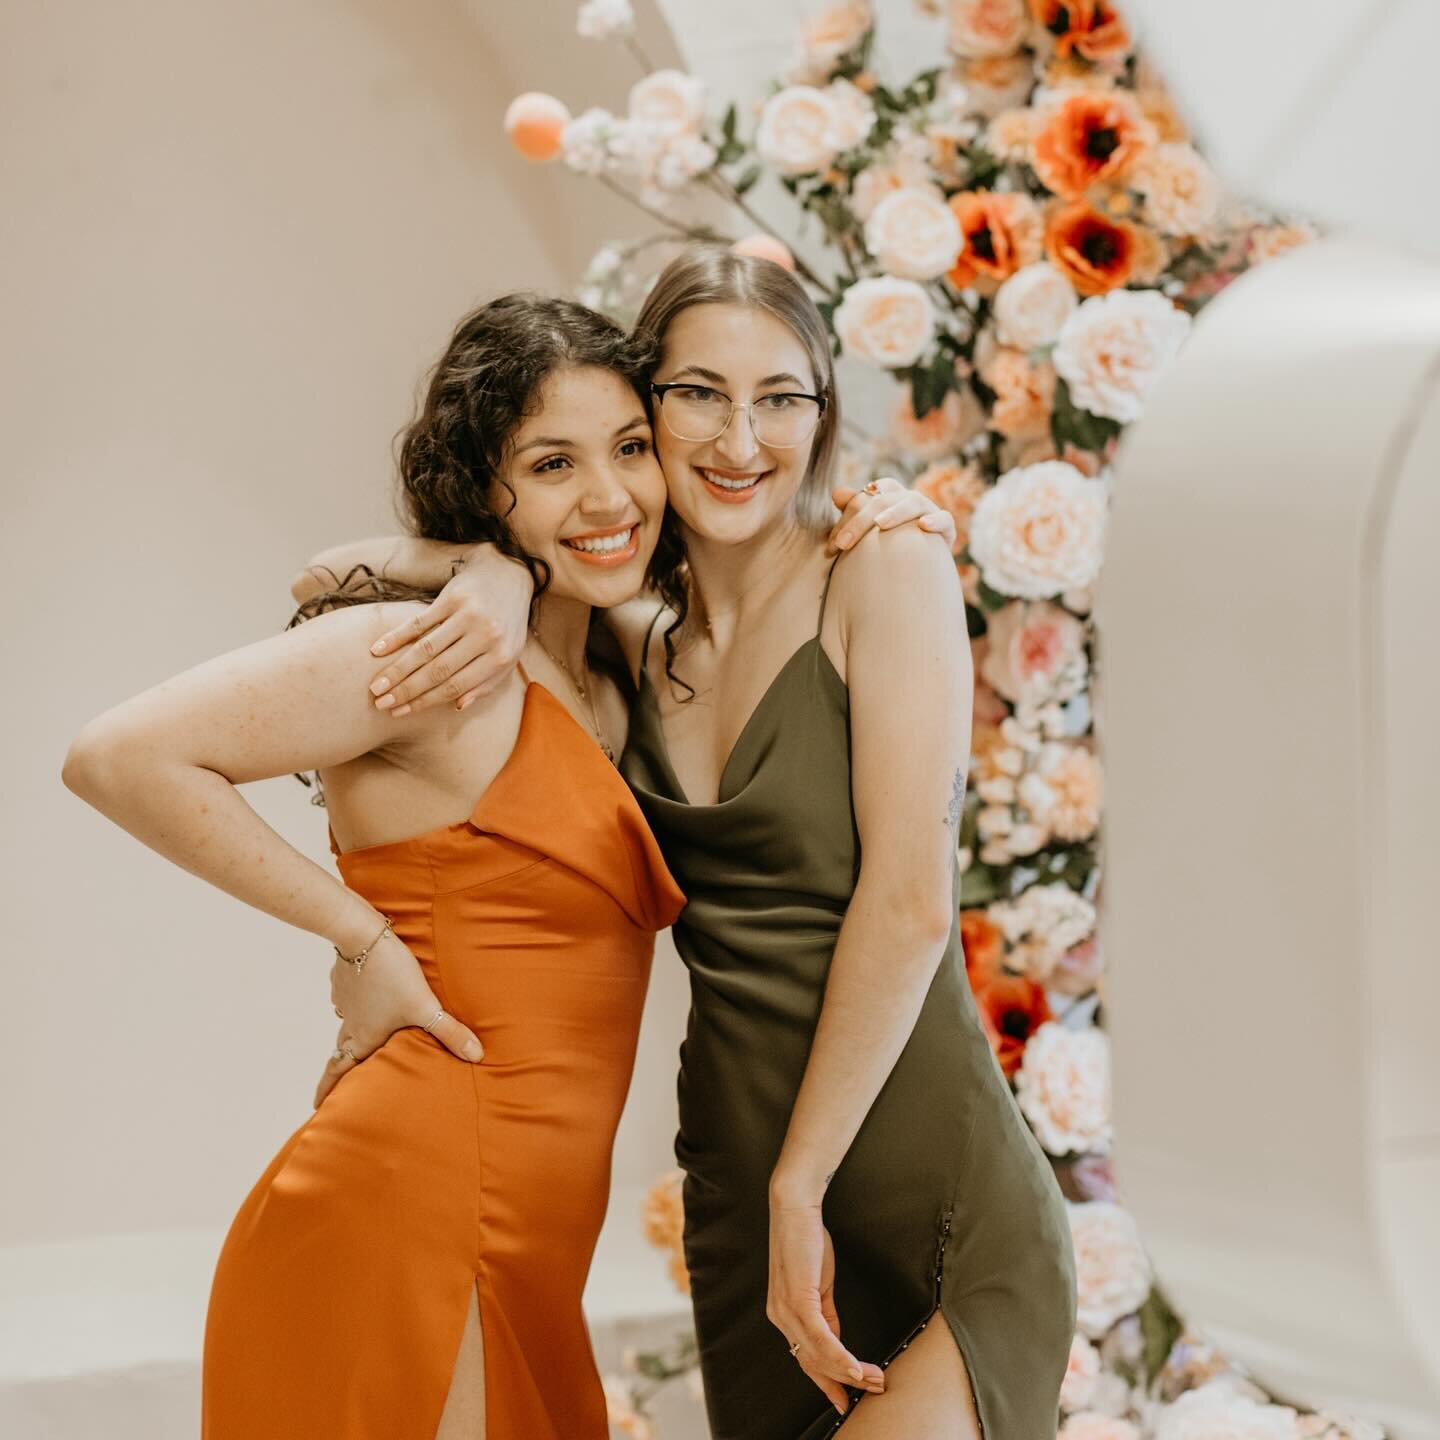 POV: You and the Bestie making the Mostie out of your Moment.Us Photobooth 🙌✨ #makeitmomentus #photobooth #photoboothwedding #weddinginspiration #weddinginspo #pantonecoloroftheyear #peachfuzz